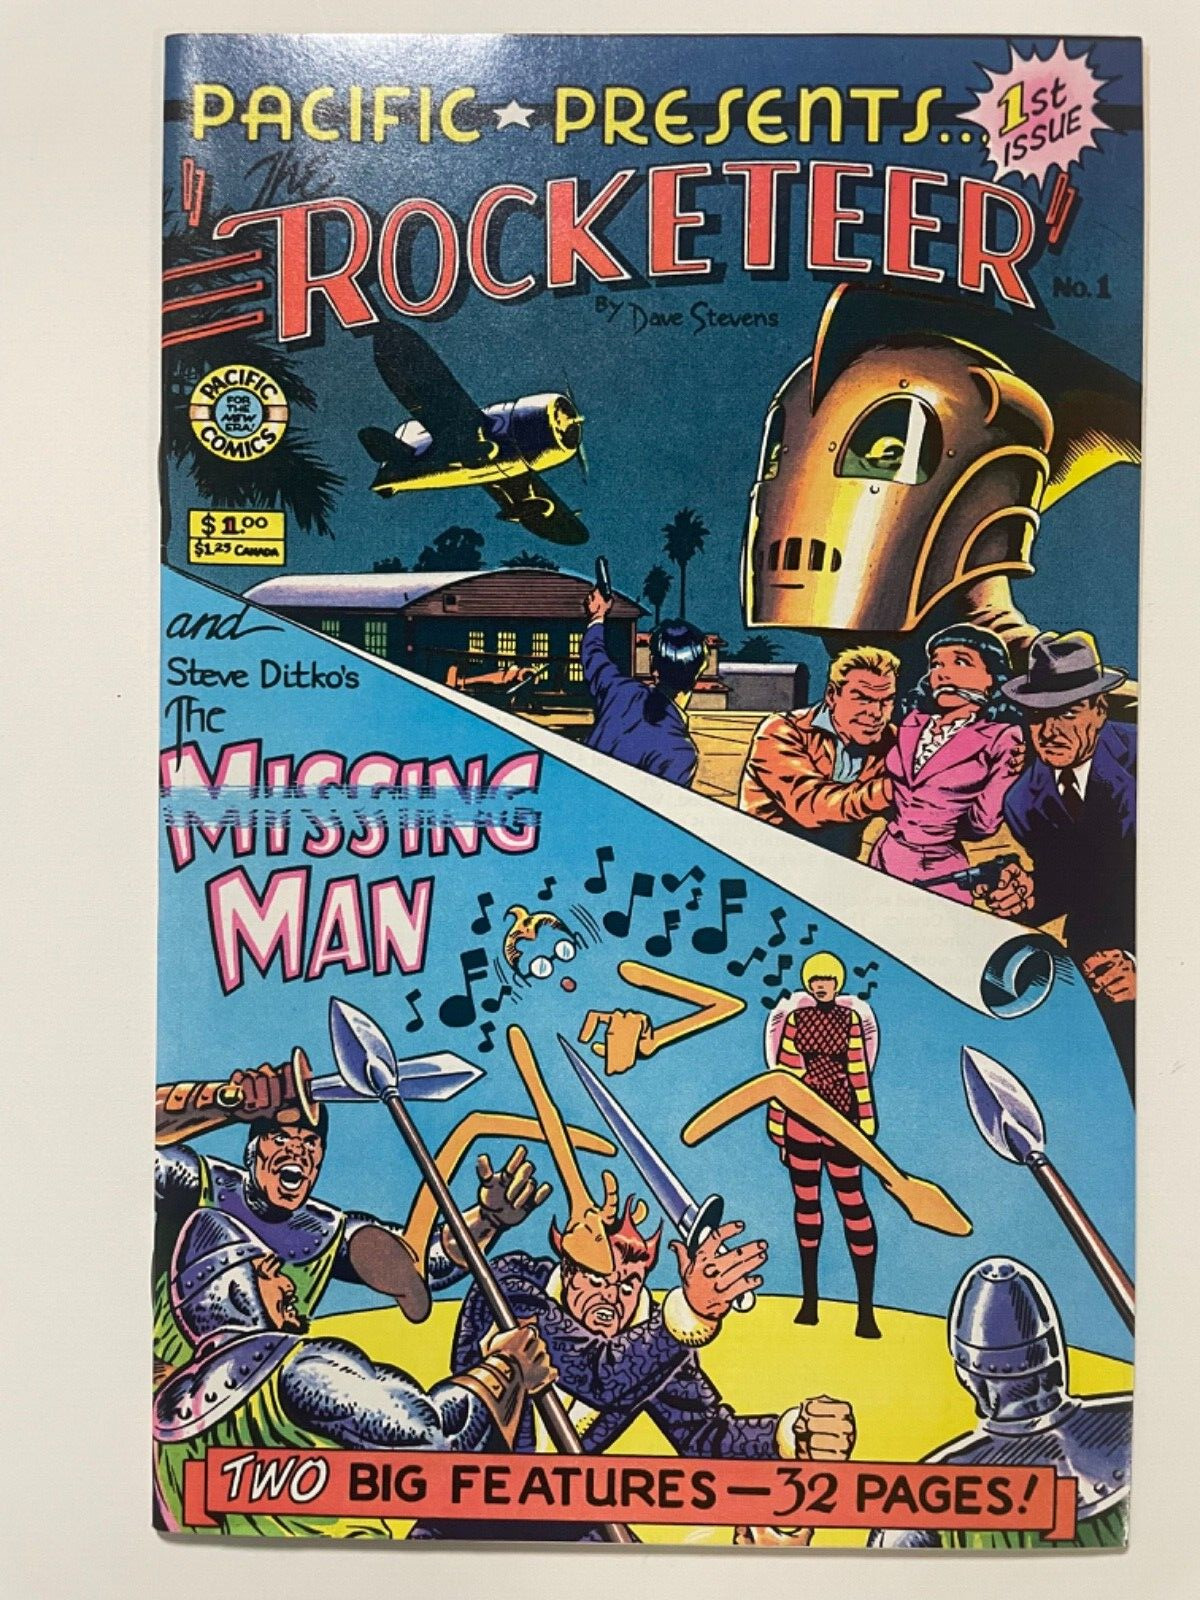 Pacific Presents The ROCKETEER #1, 9.6 NM+, Dave Stevens, 1982 Very nice.